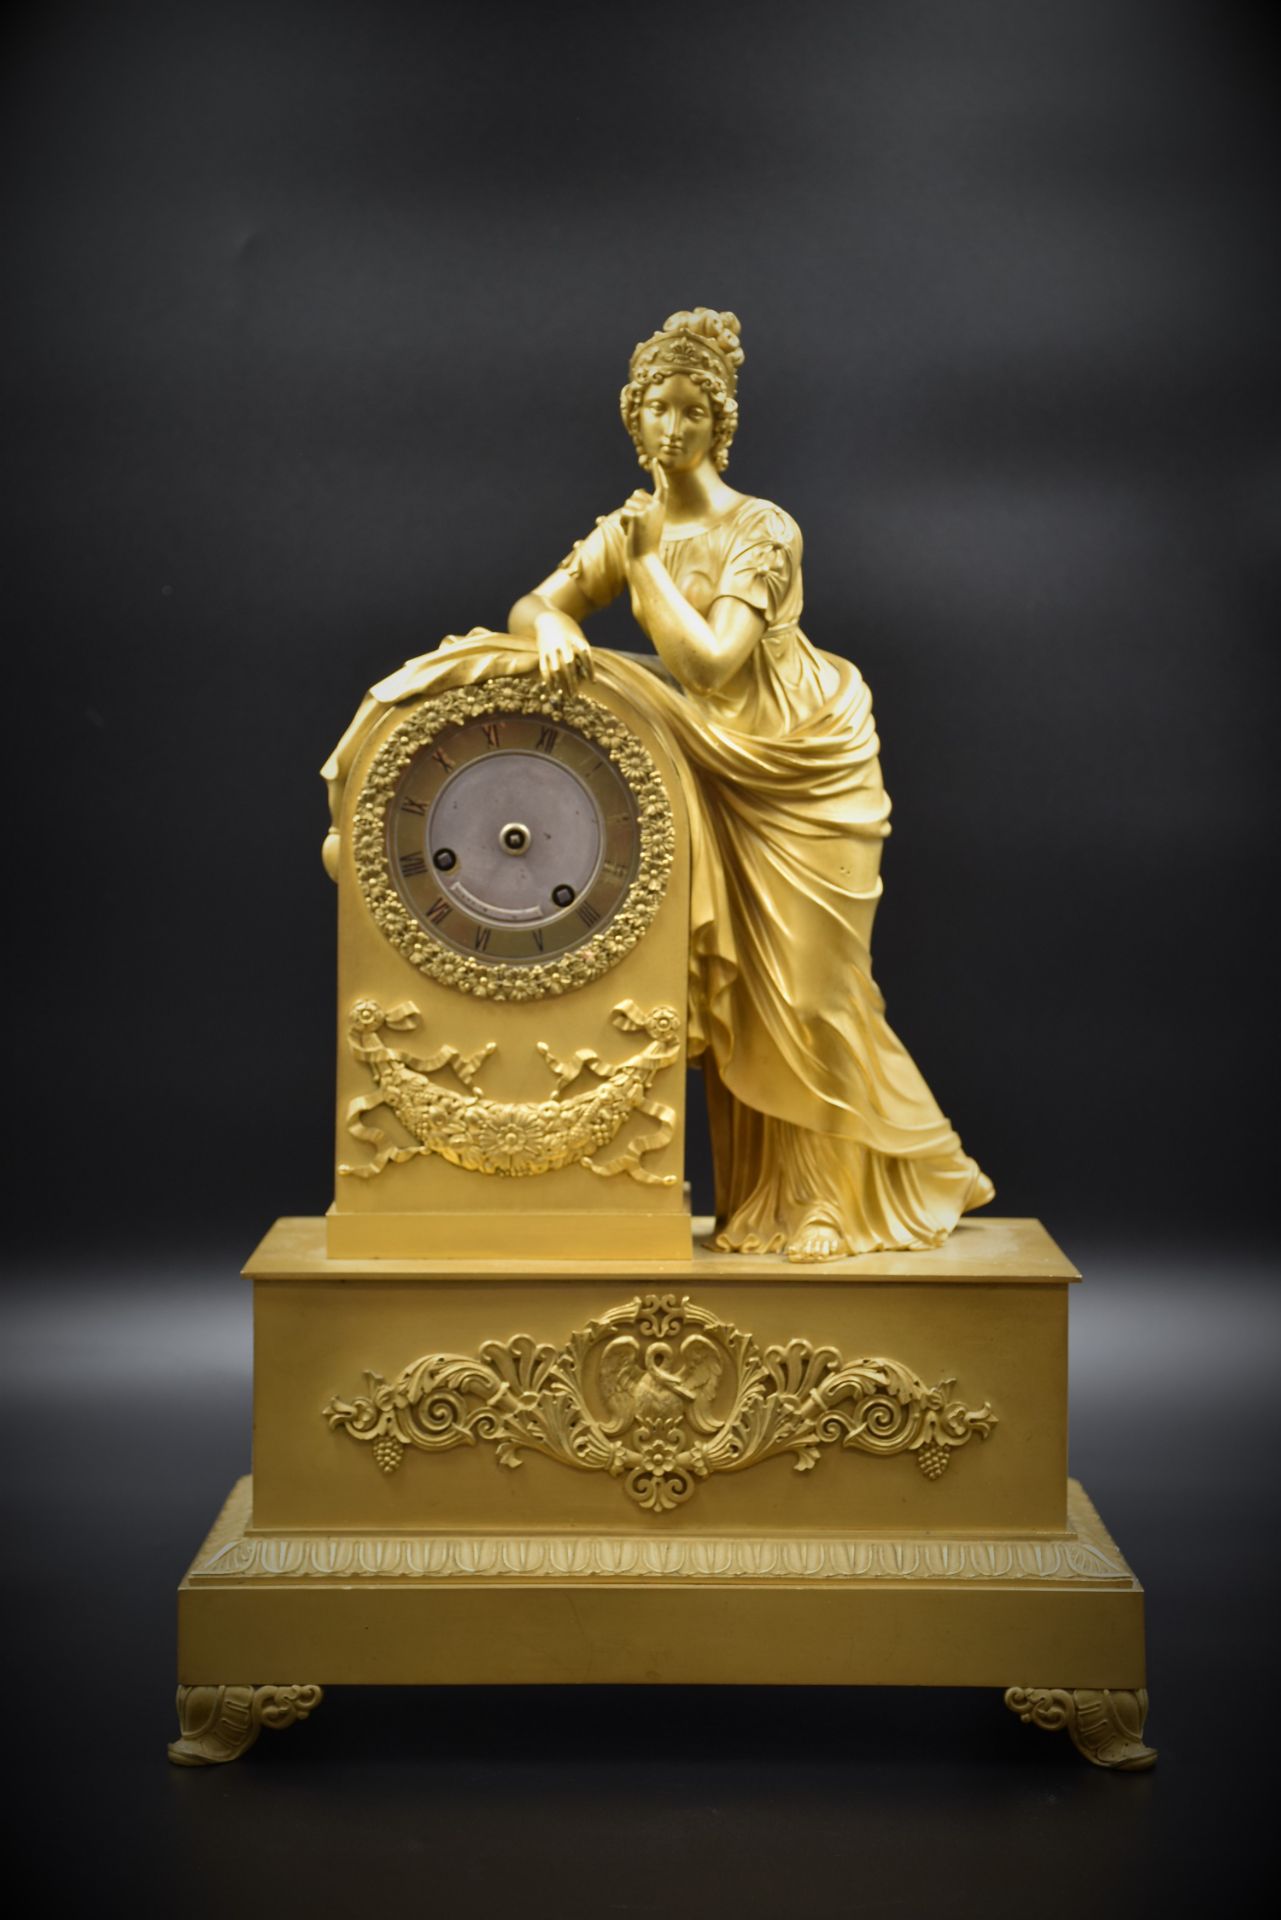 Gilt bronze clock with antique subject. Restoration period. Missing the hands. (No key or